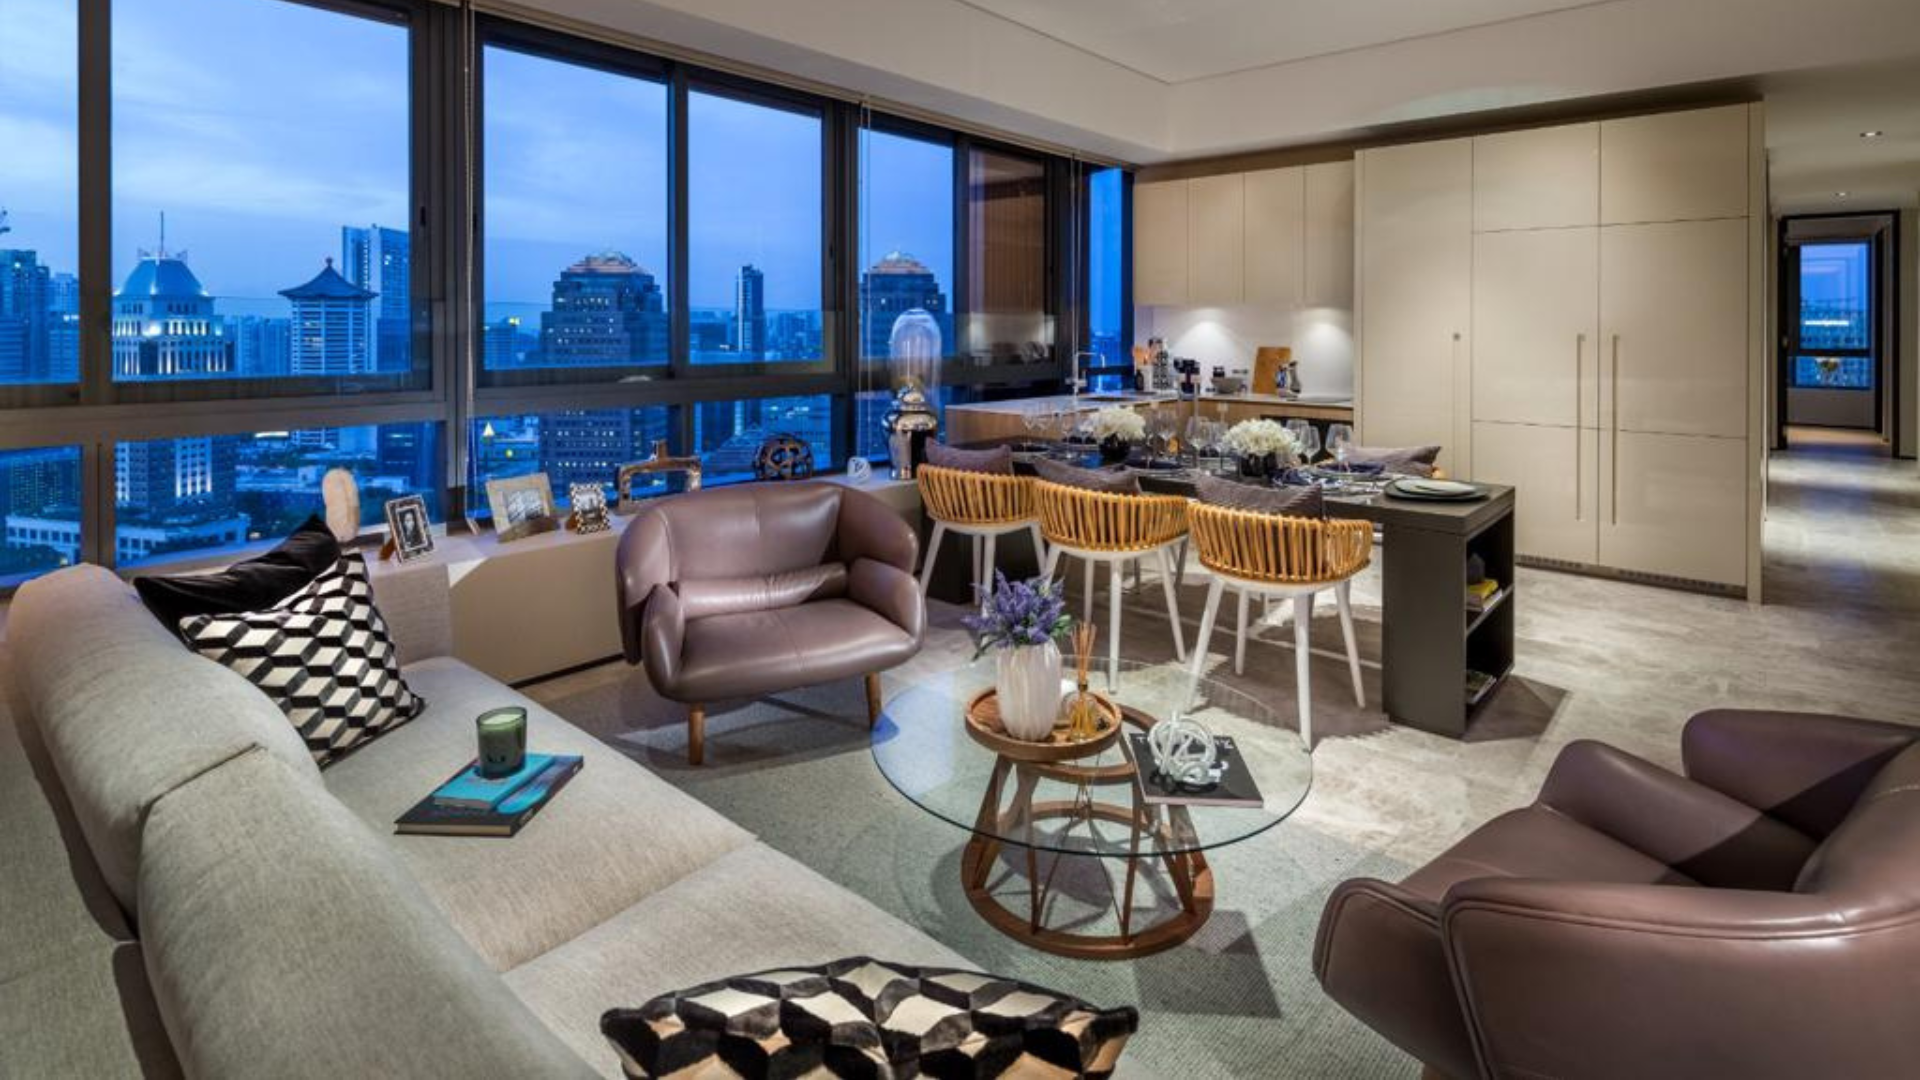 OUE Twin Peaks Singapore luxury apartments living room